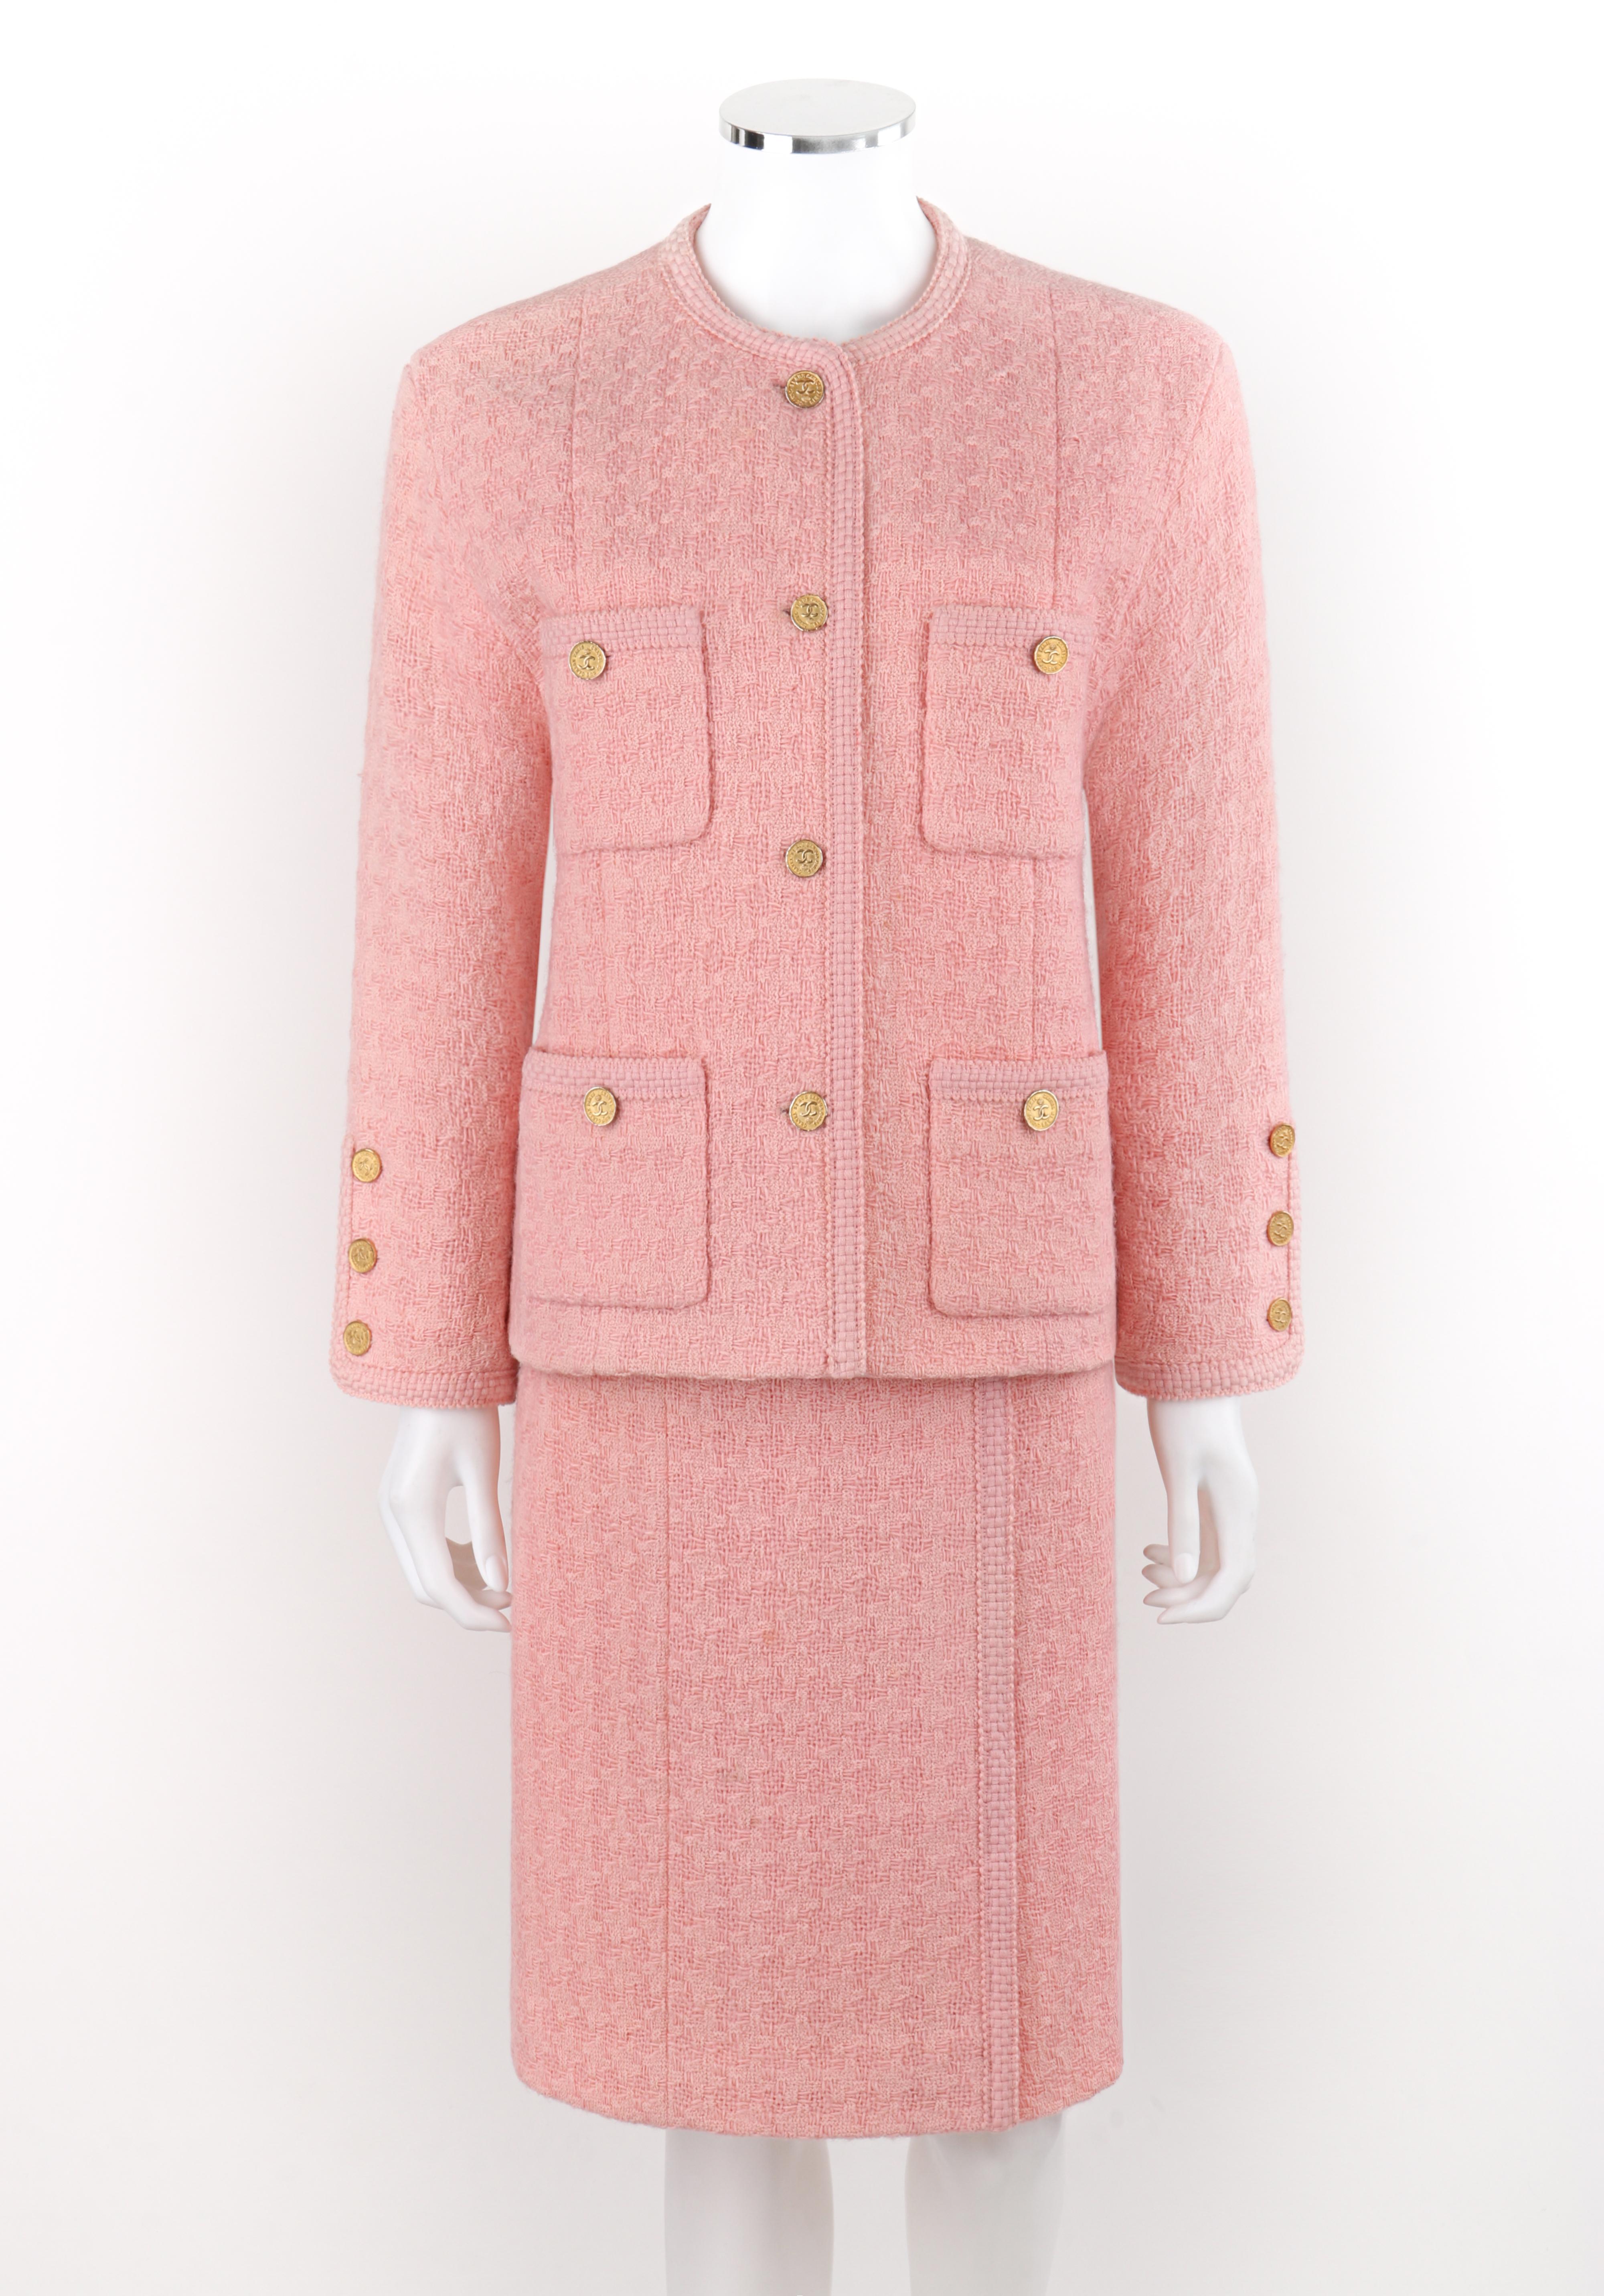 CHANEL c.1980's 2pc Pink Gold Button-Up Tweed Woven Trim Jacket Skirt Suit Set

Brand / Manufacturer: Chanel
Circa: 1980's
Designer: Karl Lagerfeld
Style: Jacket Skirt Suit Set
Color(s): Shades of pink, gold
Lined: Yes 
Unmarked Fabric Content (feel